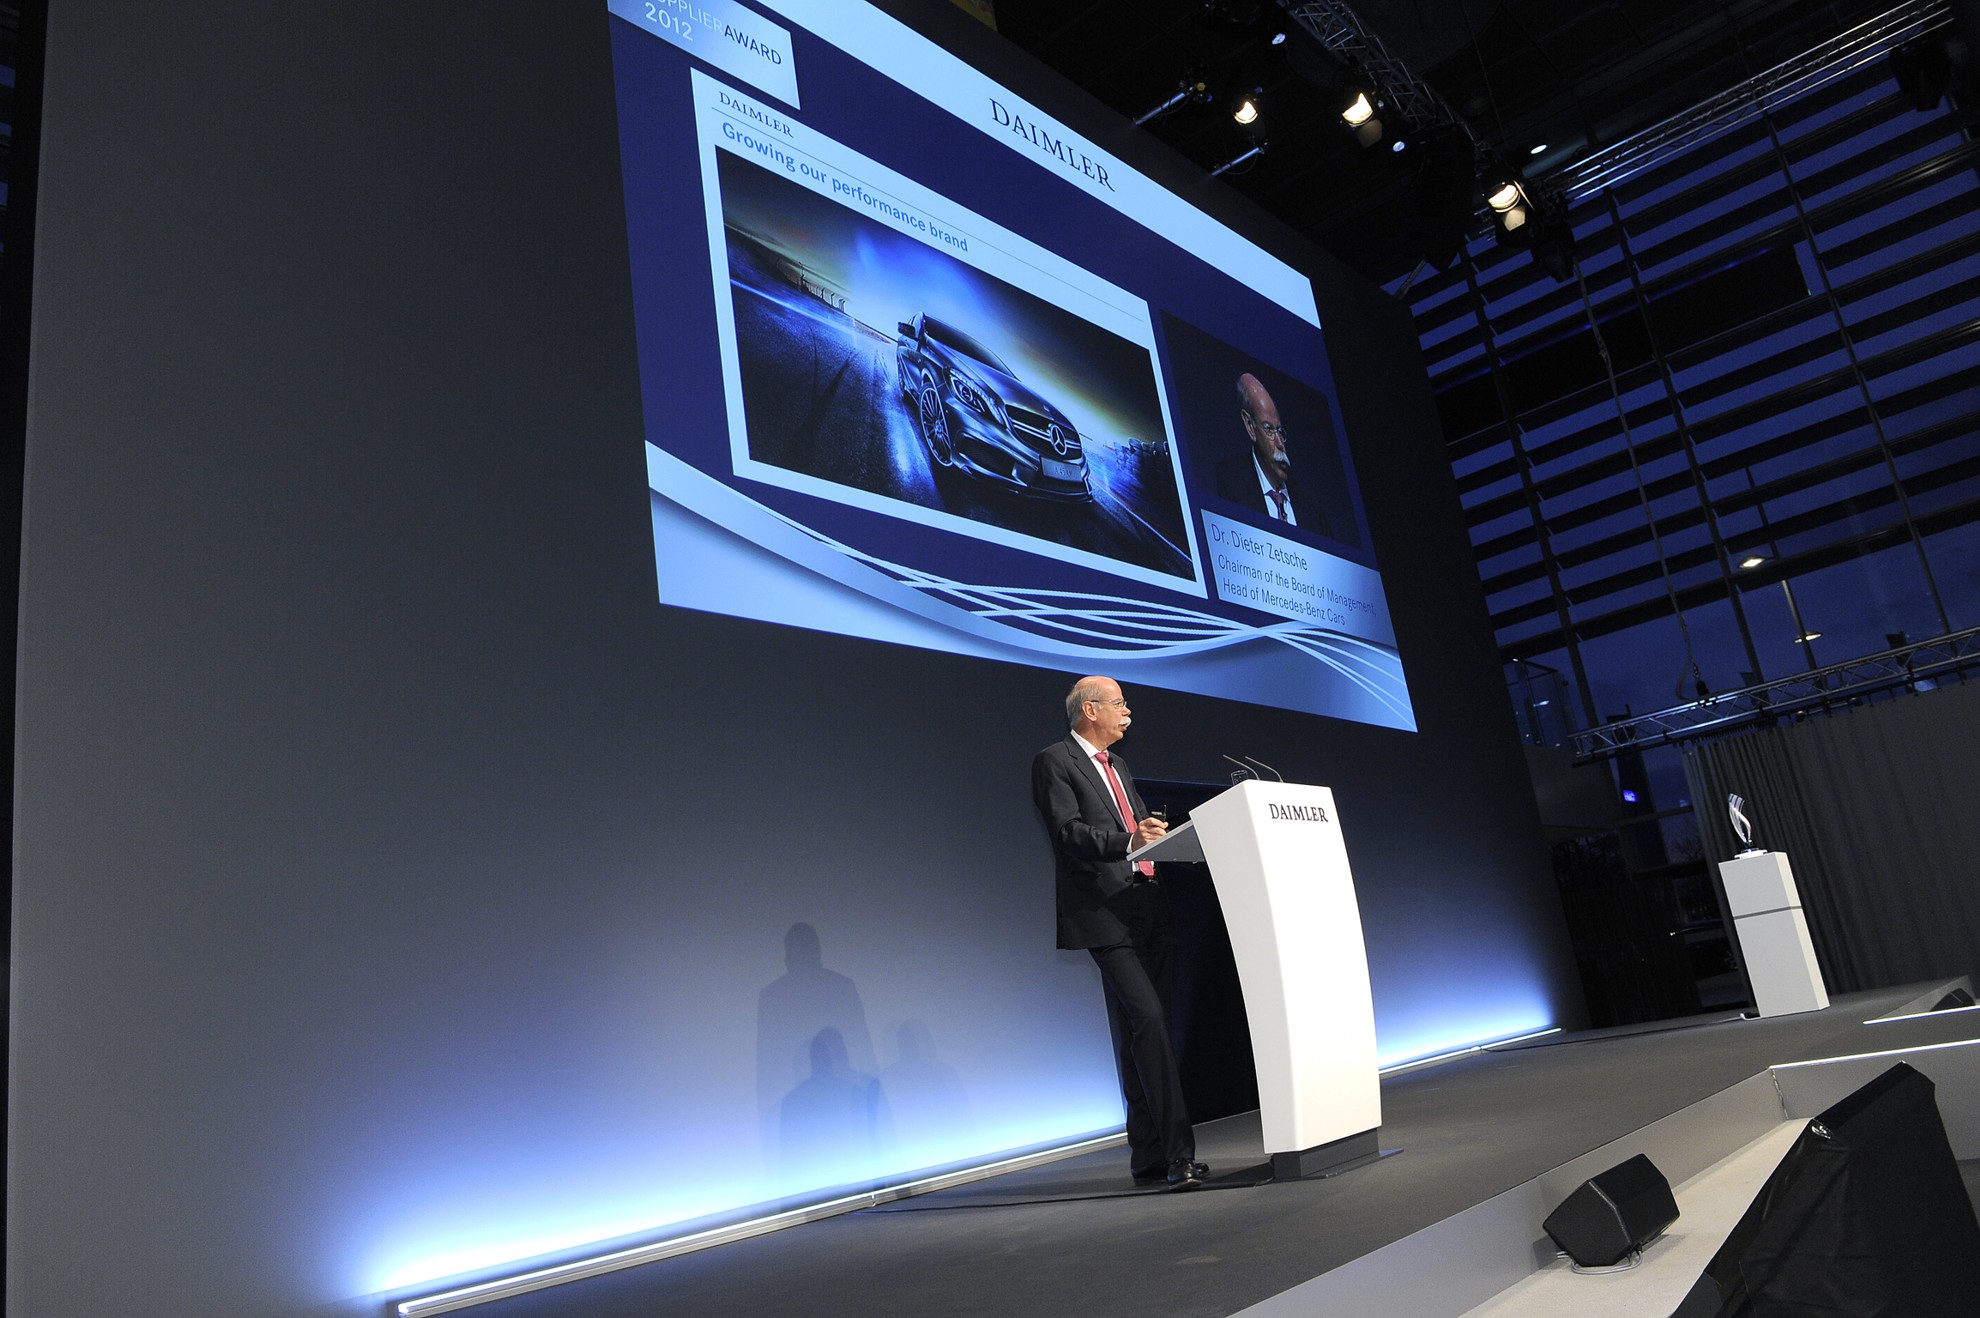 Daimler Awards Best Suppliers in Recognition of Outstanding Performance